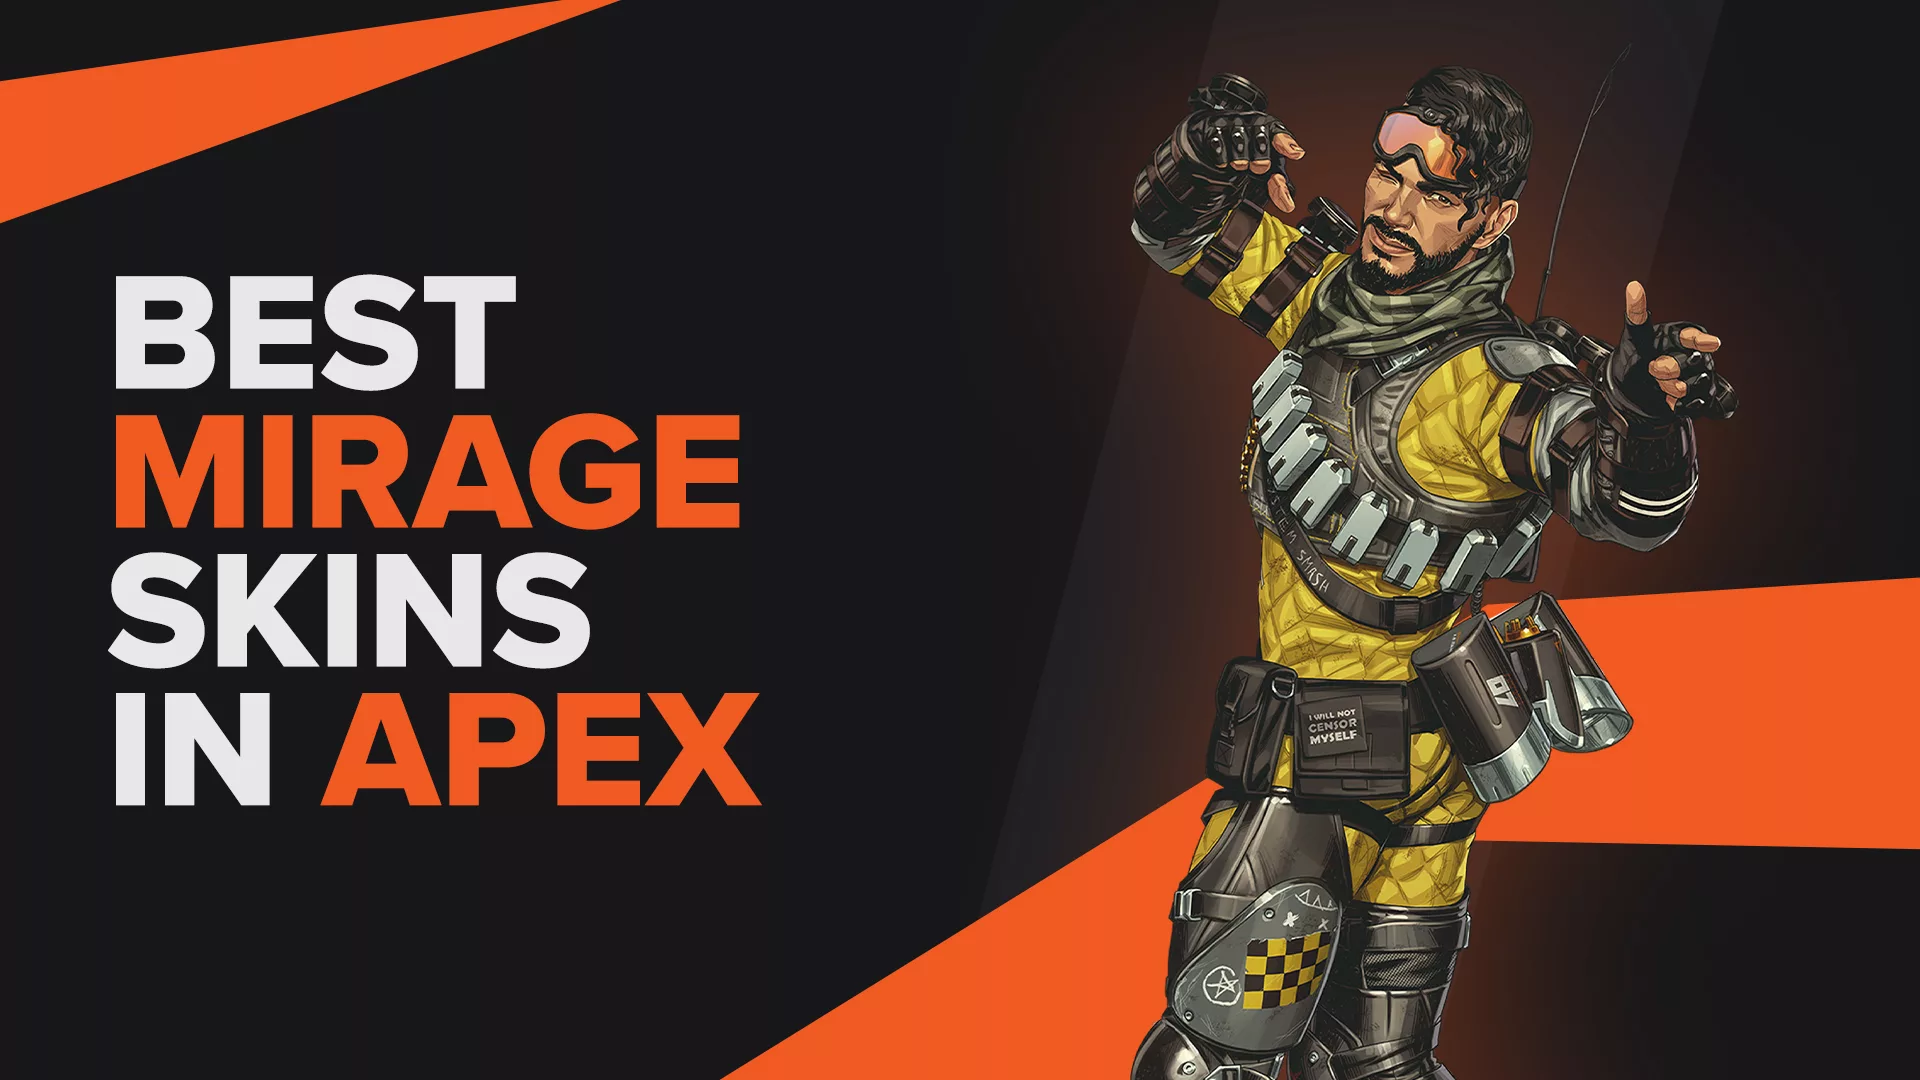 The Best Mirage Skins in Apex Legends That Make You Standout